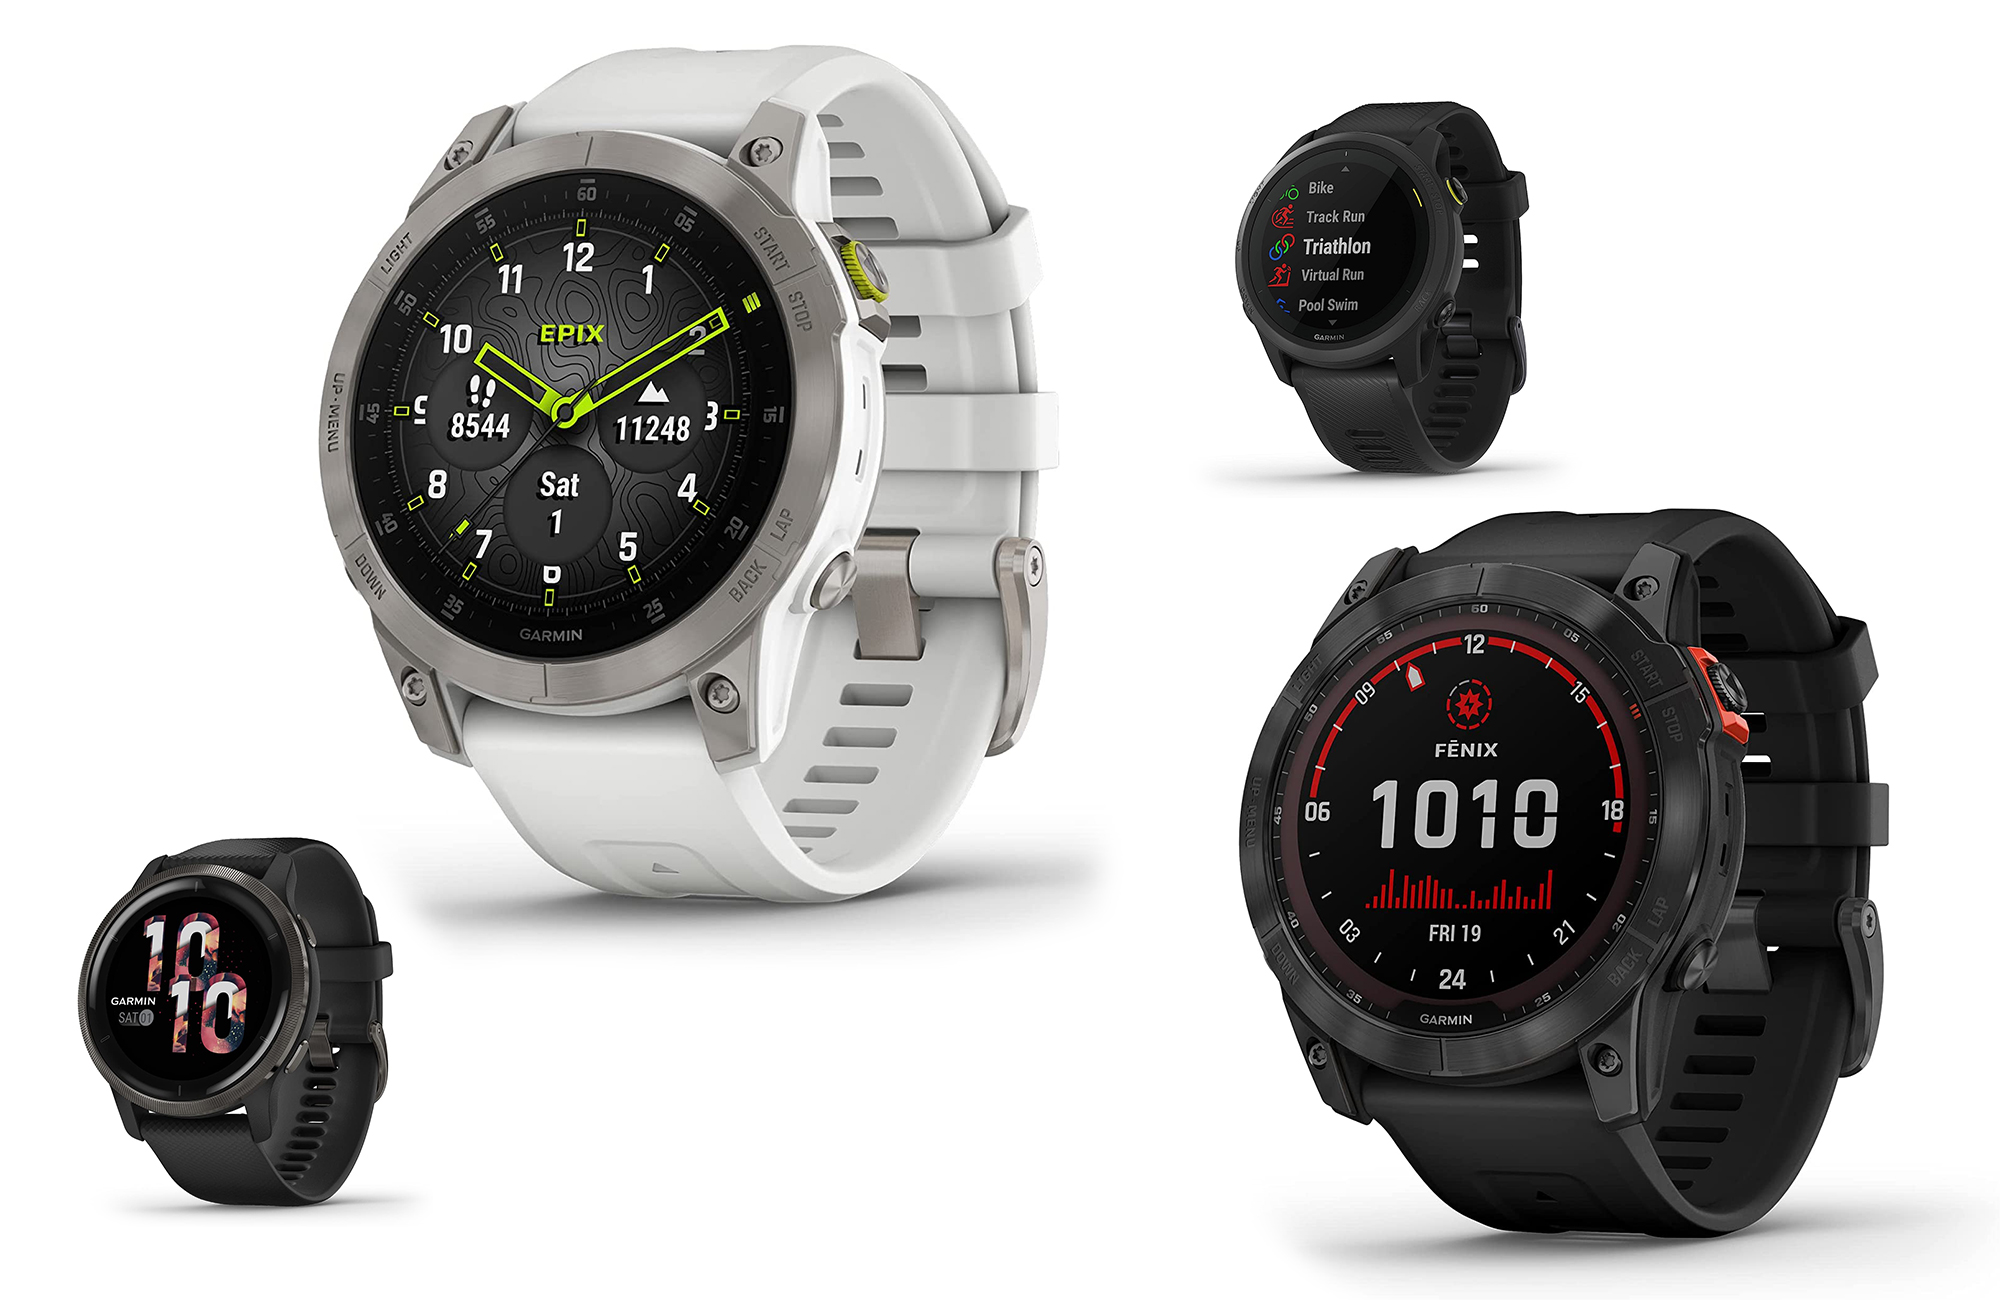 Save up to 0 on Garmin watches with these Prime Day deals